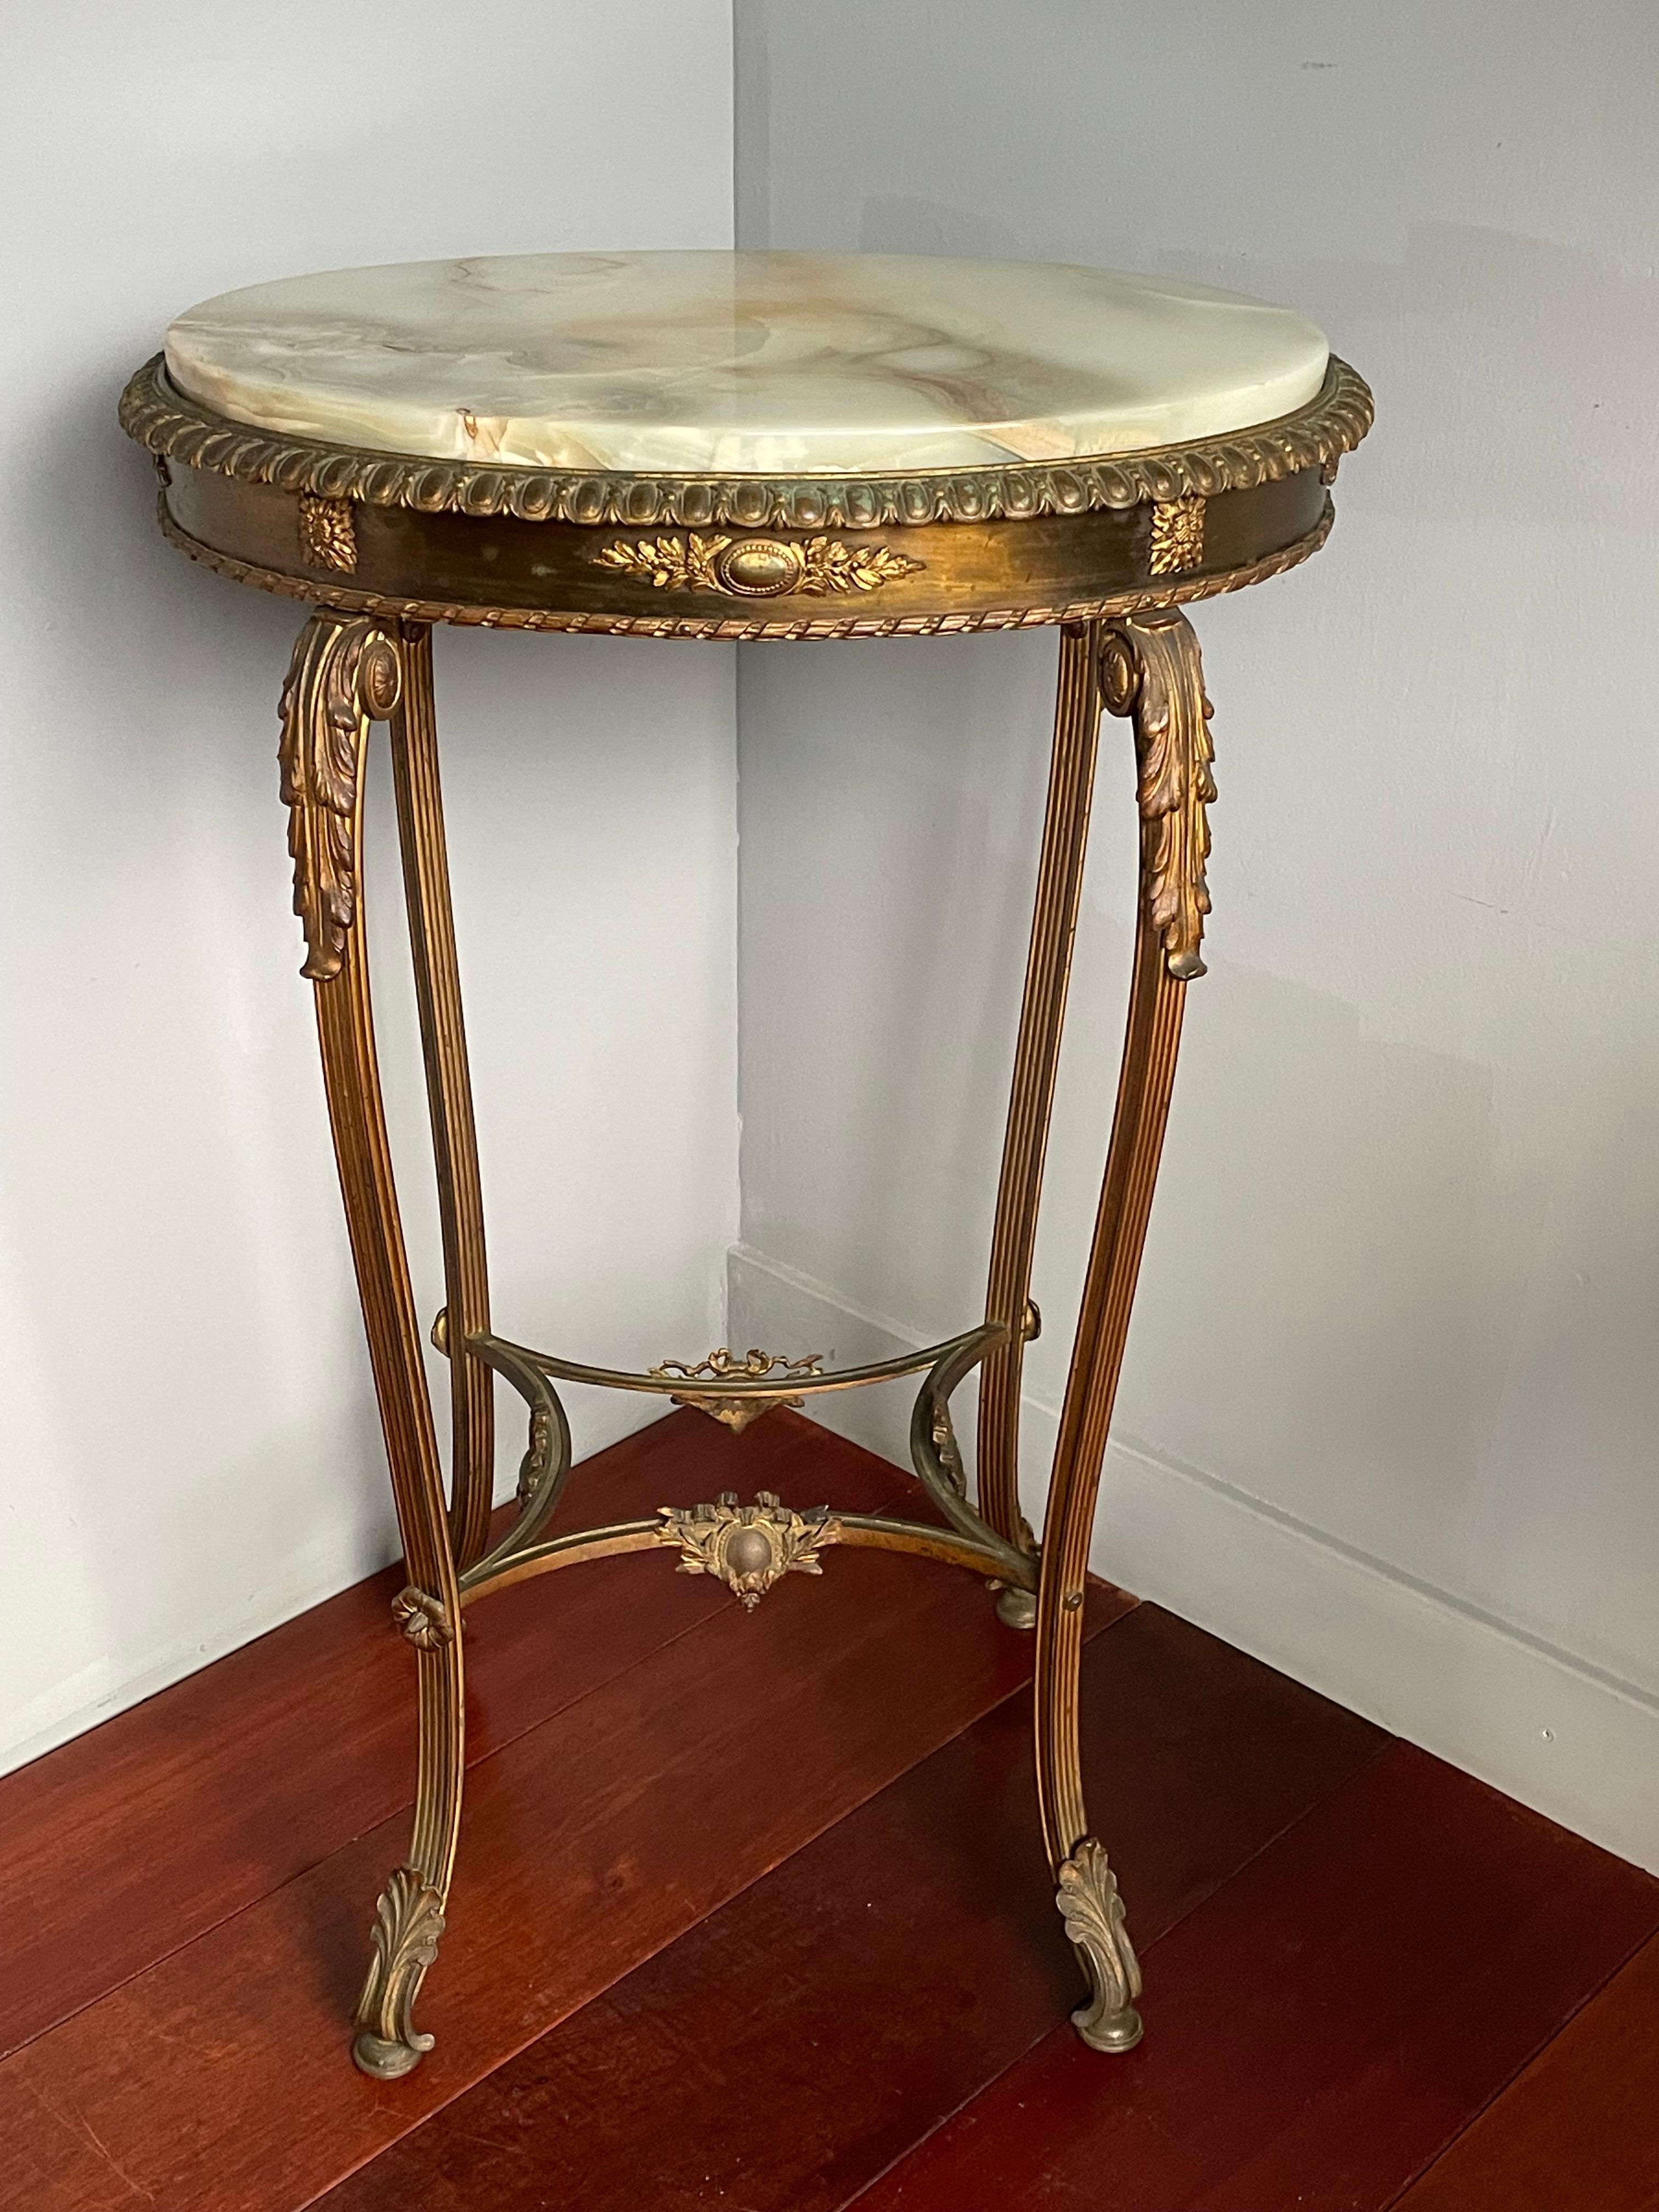 Unique and impressive, finest quality and gilt bronze table.

Because of the quality and great style we feel this stunning antique table can only have been made by one of the top class makers in or around Paris in the second half of the 1800s. So if